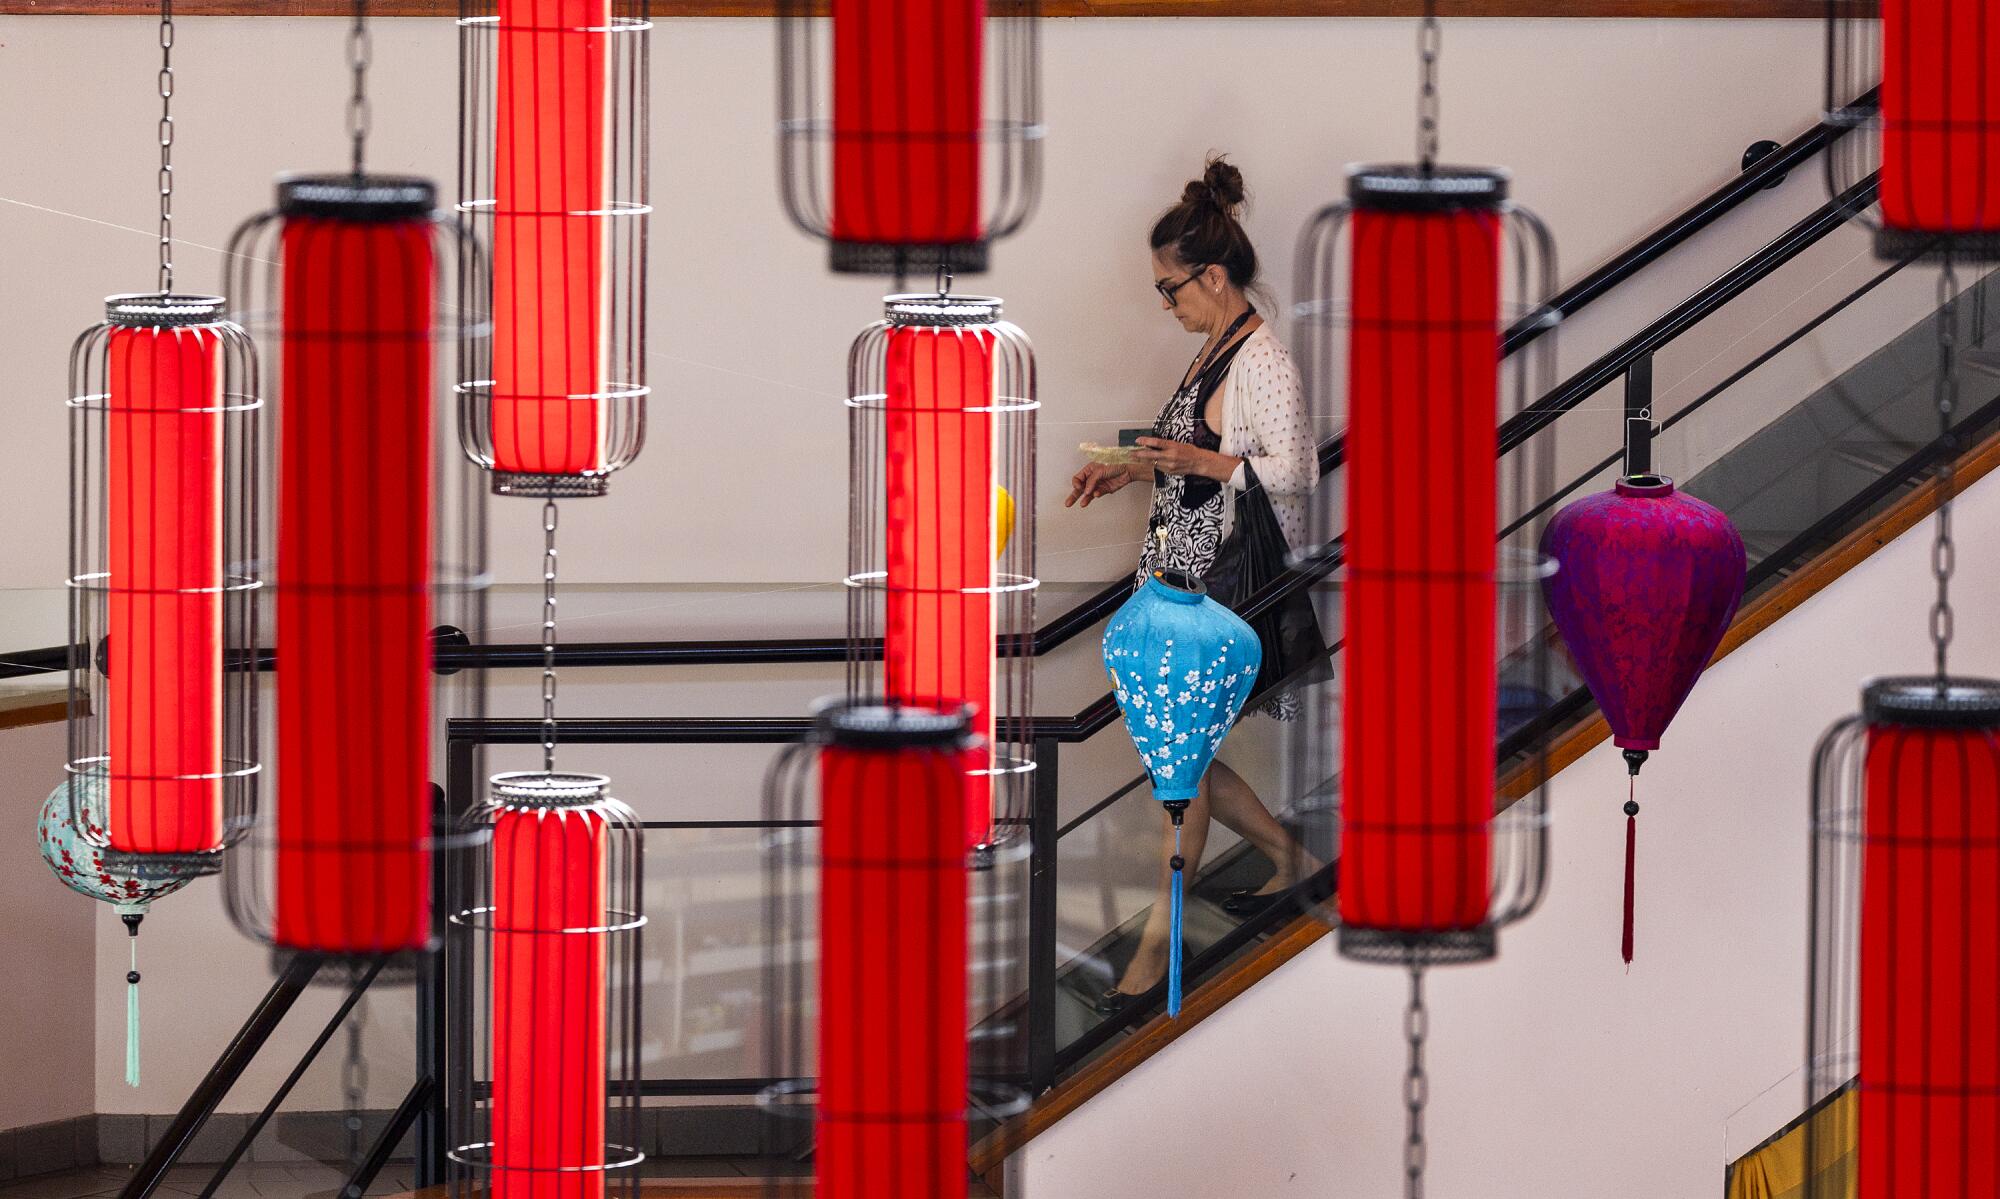 A woman walks down a flight of stairs while red lanterns hang in the foreground.